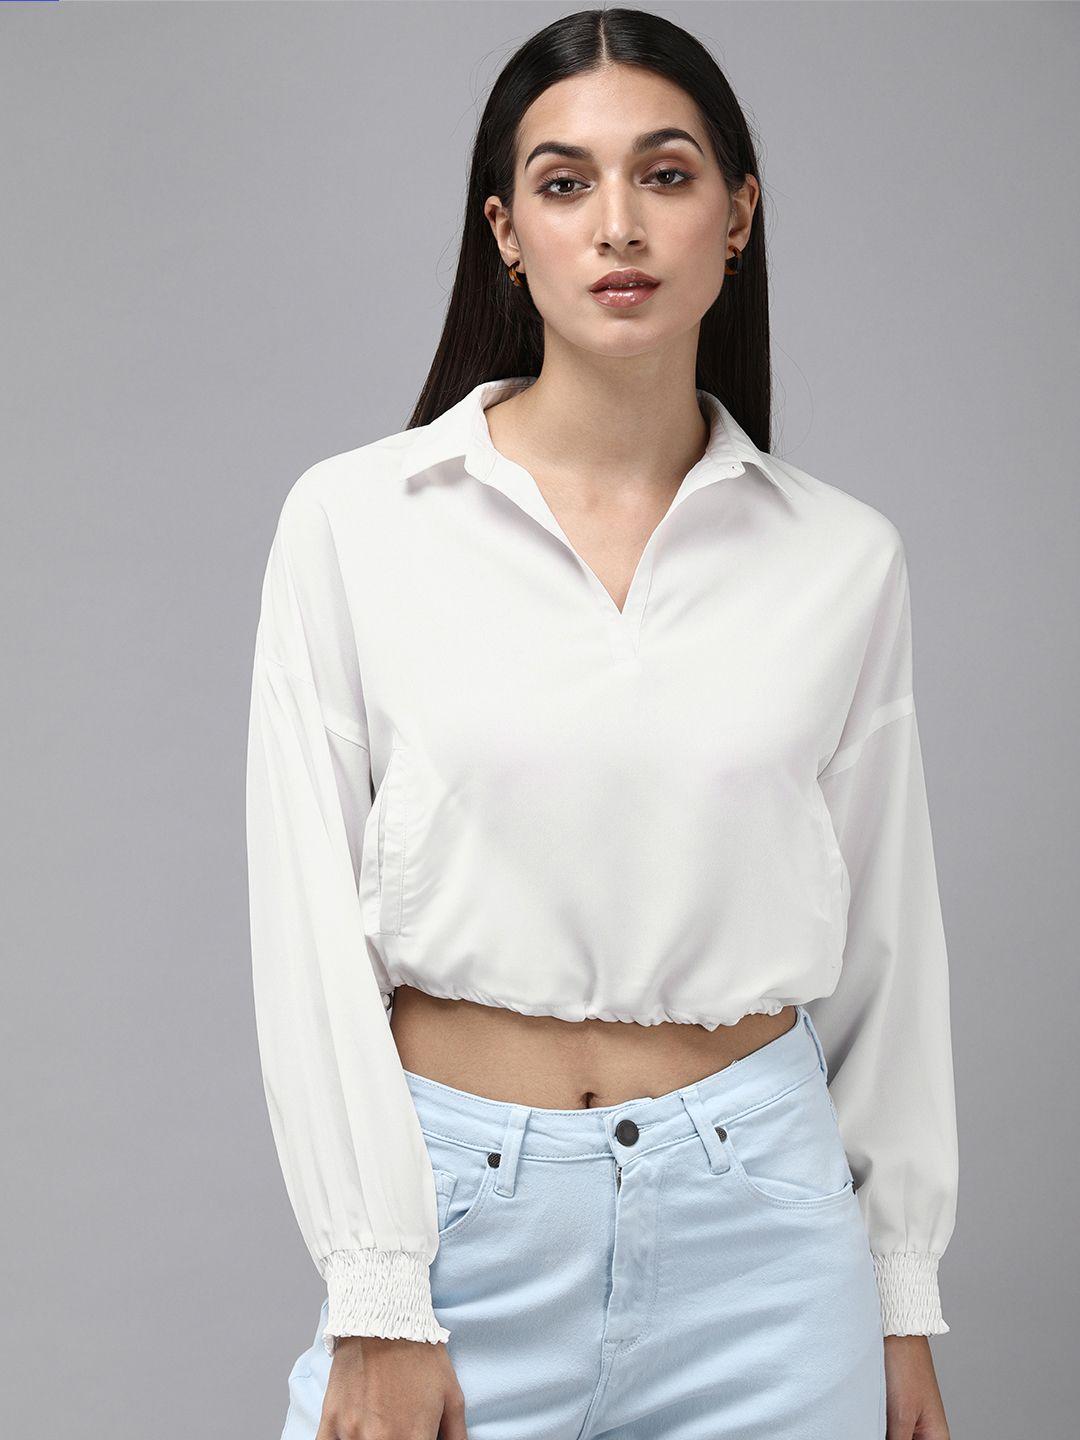 the roadster lifestyle co. women white  solid casual shirt